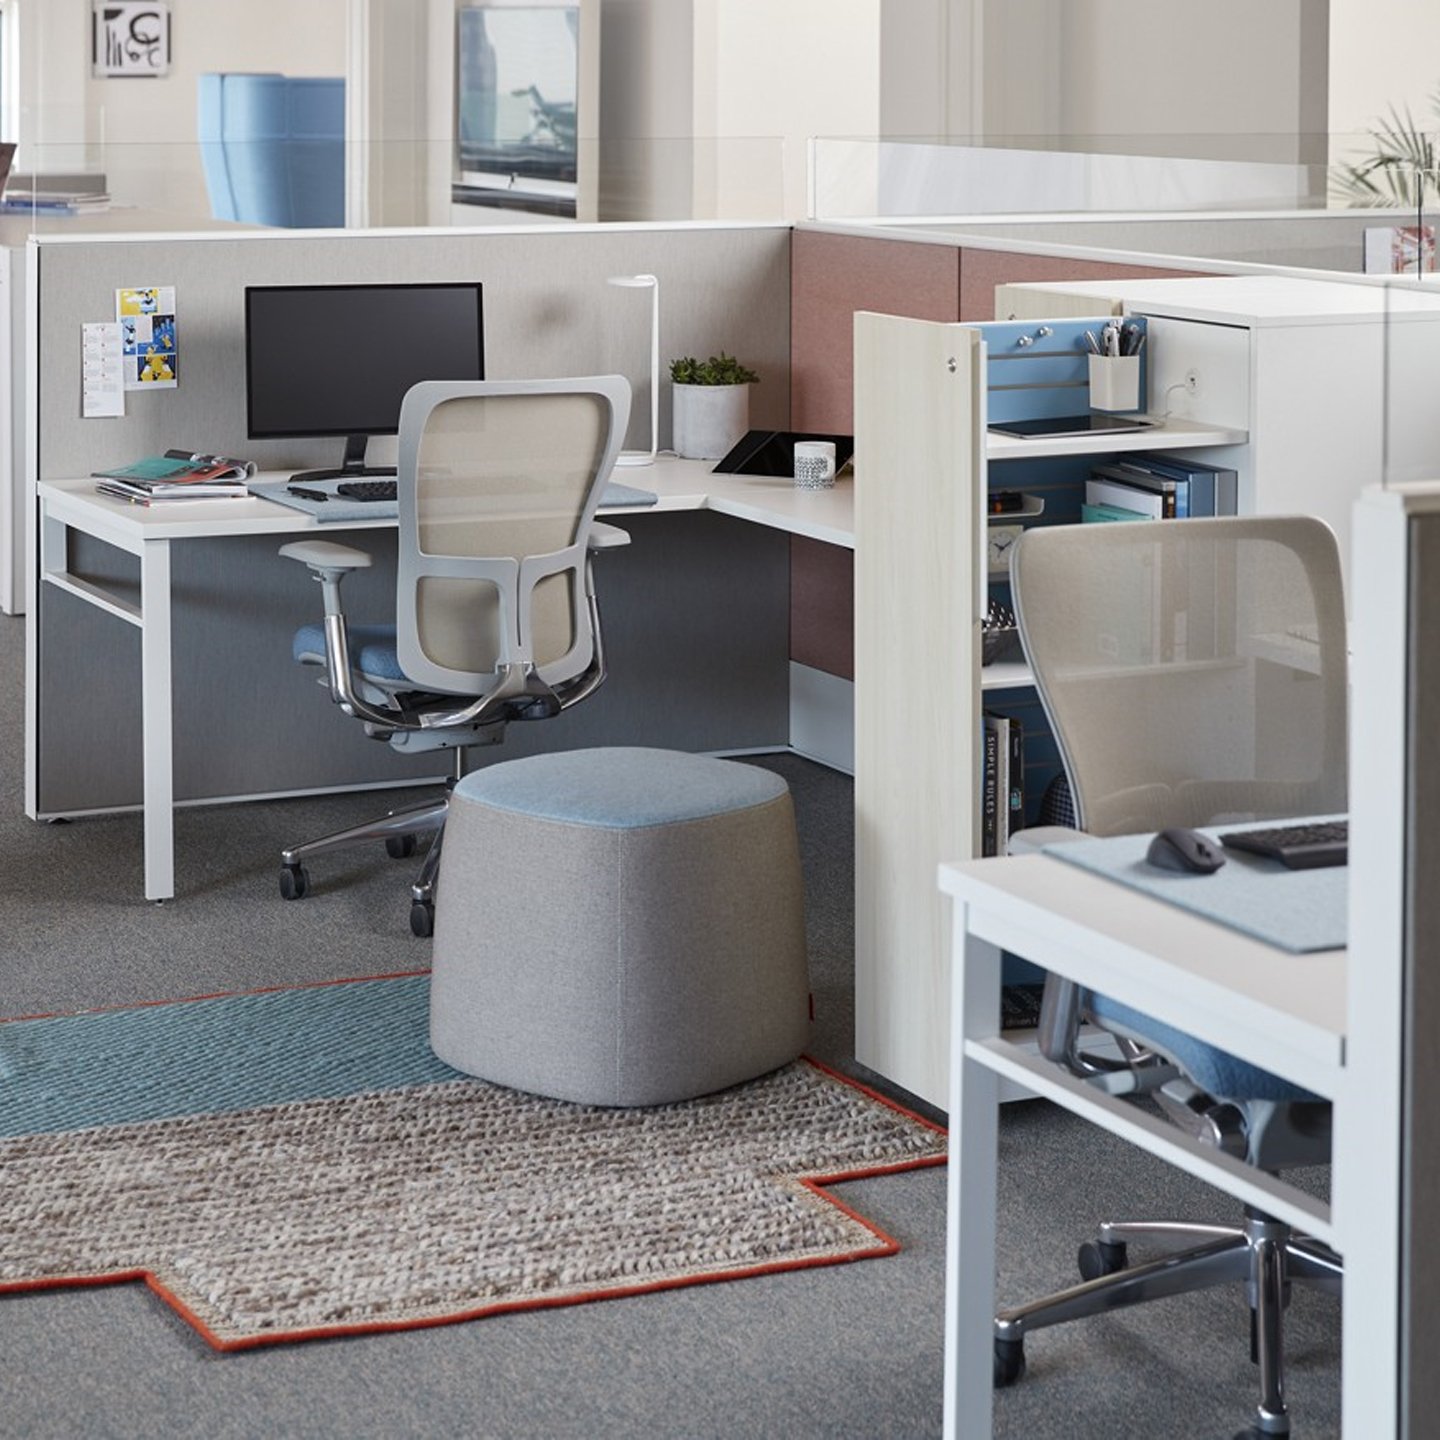 Haworth Compose Workspace in office space area with shelves and chairs and monitors facing opposite directions